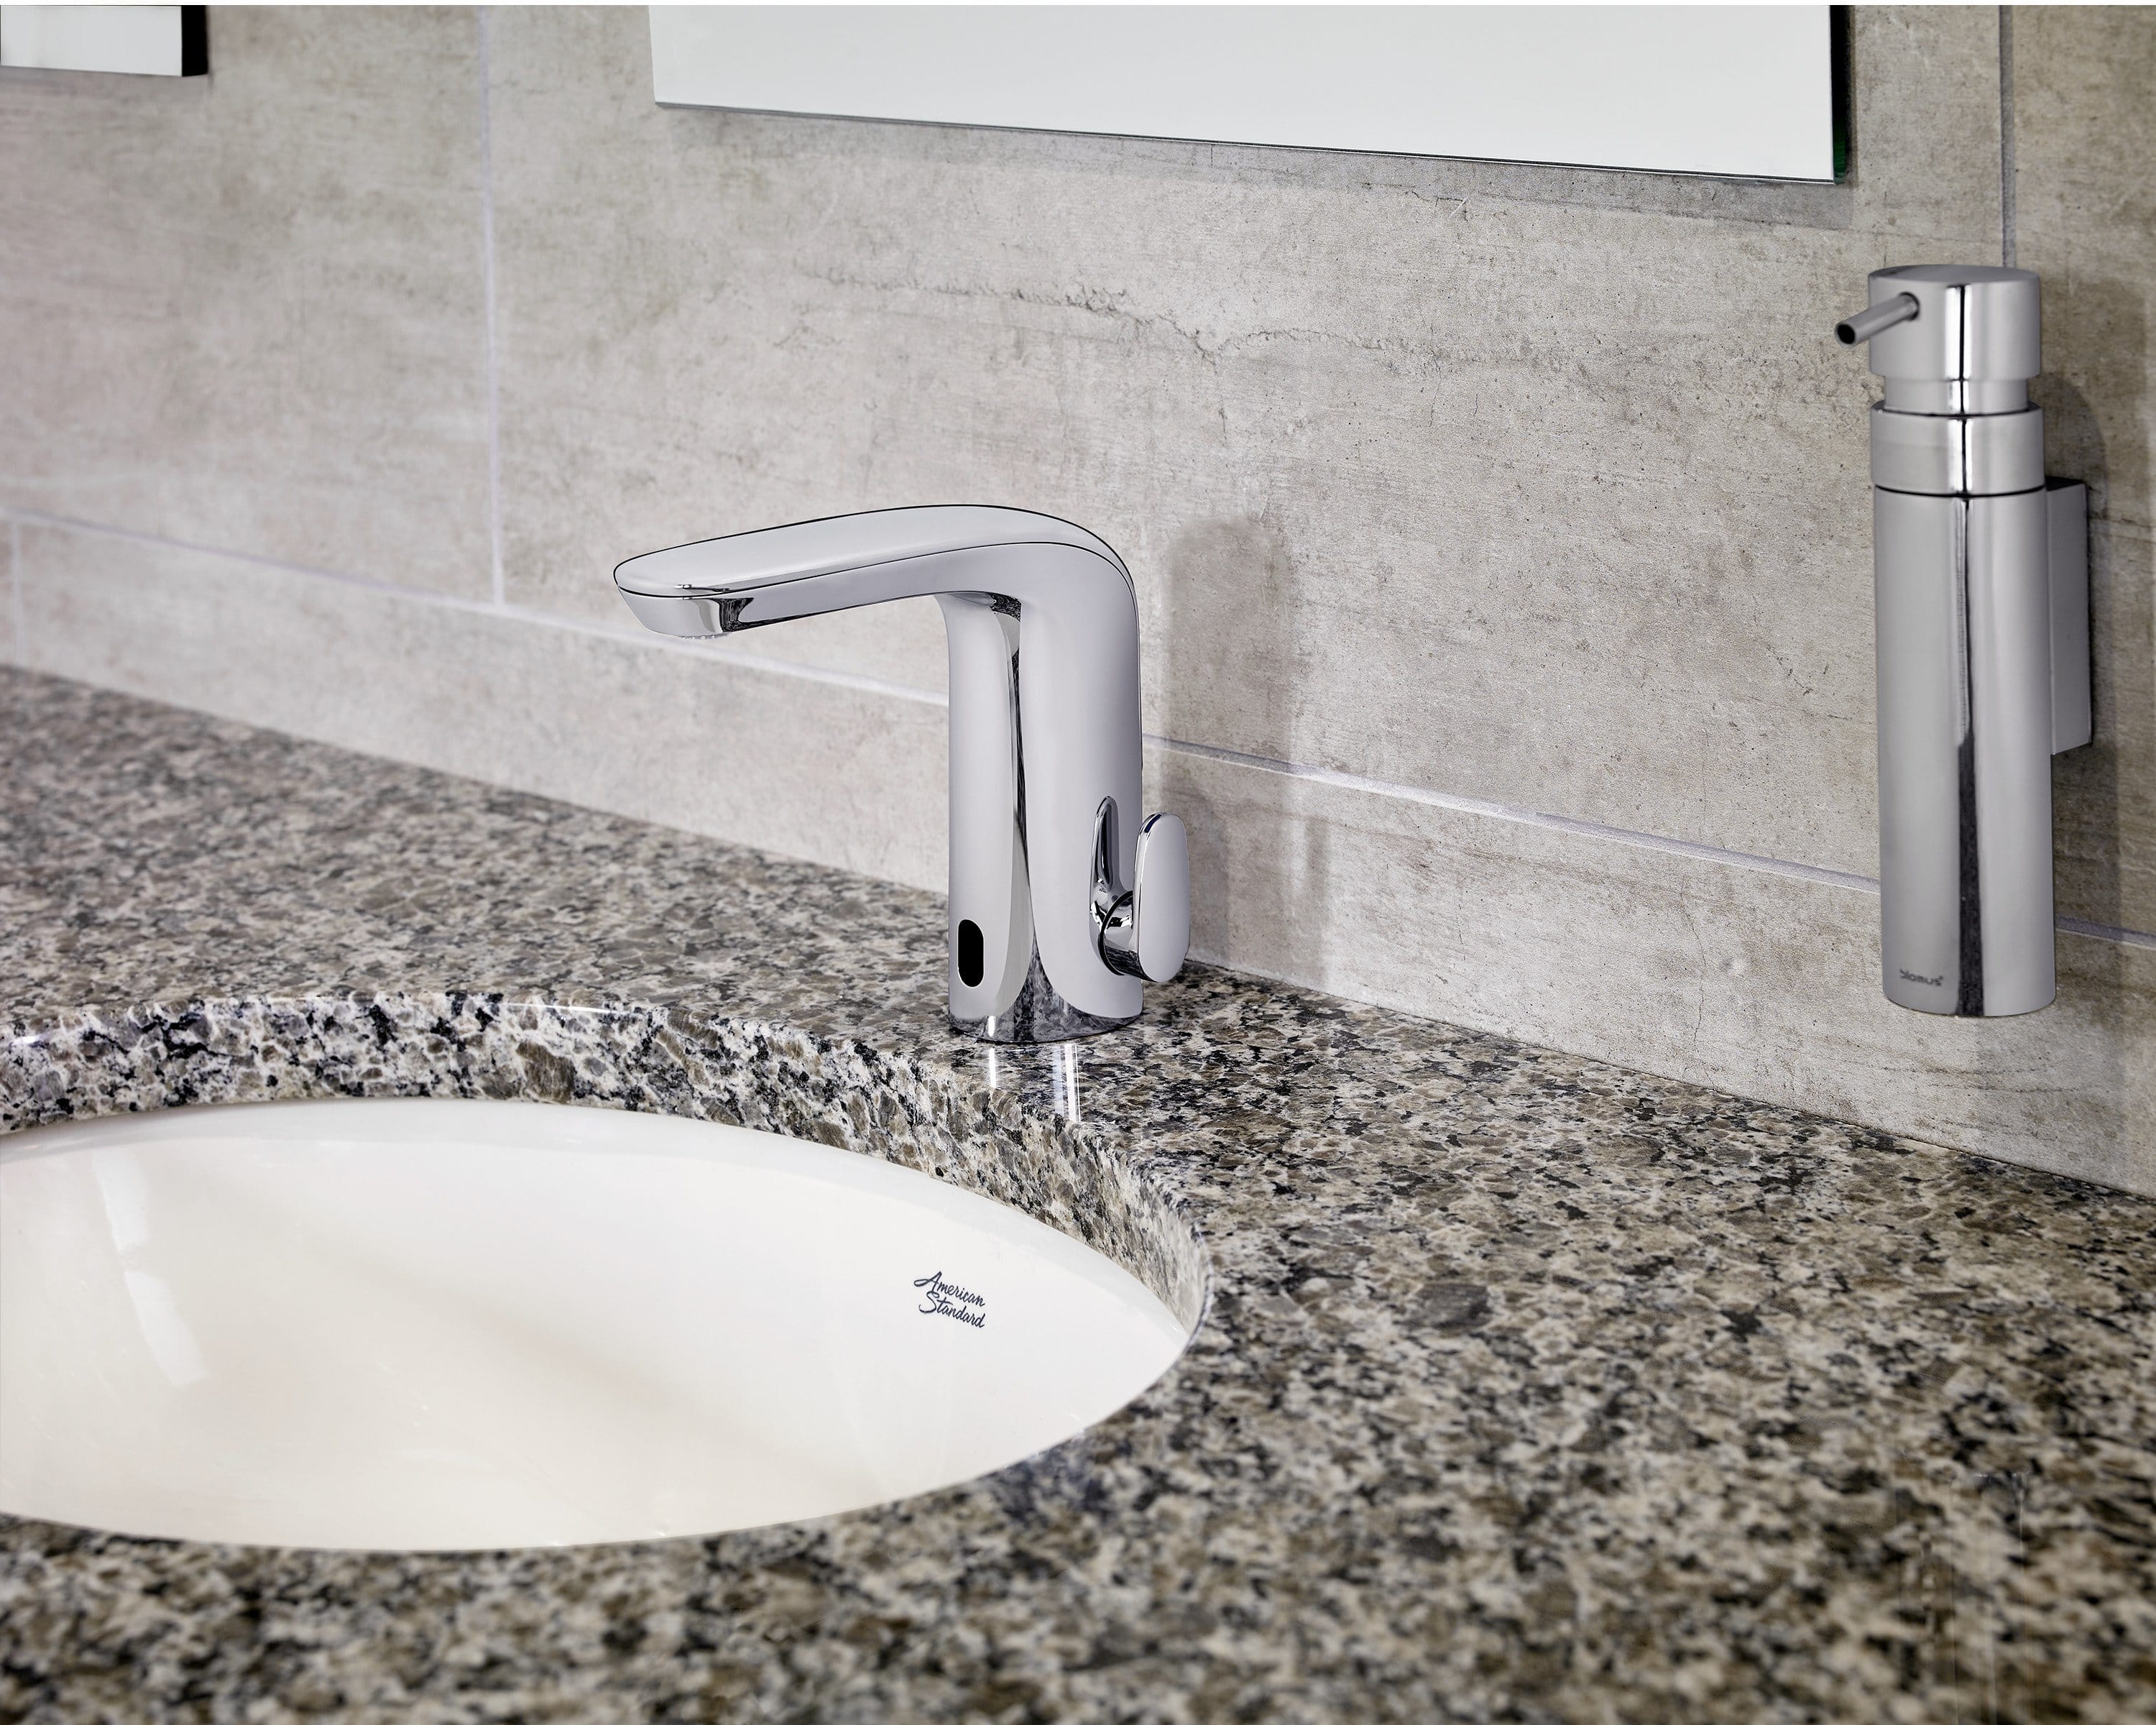 Polished Chrome American Standard 7755305.002 NextGen Selectronic Integrated Faucet Base 7755305.002 Above Deck Mixing 1.5 GPM Laminar Flow 